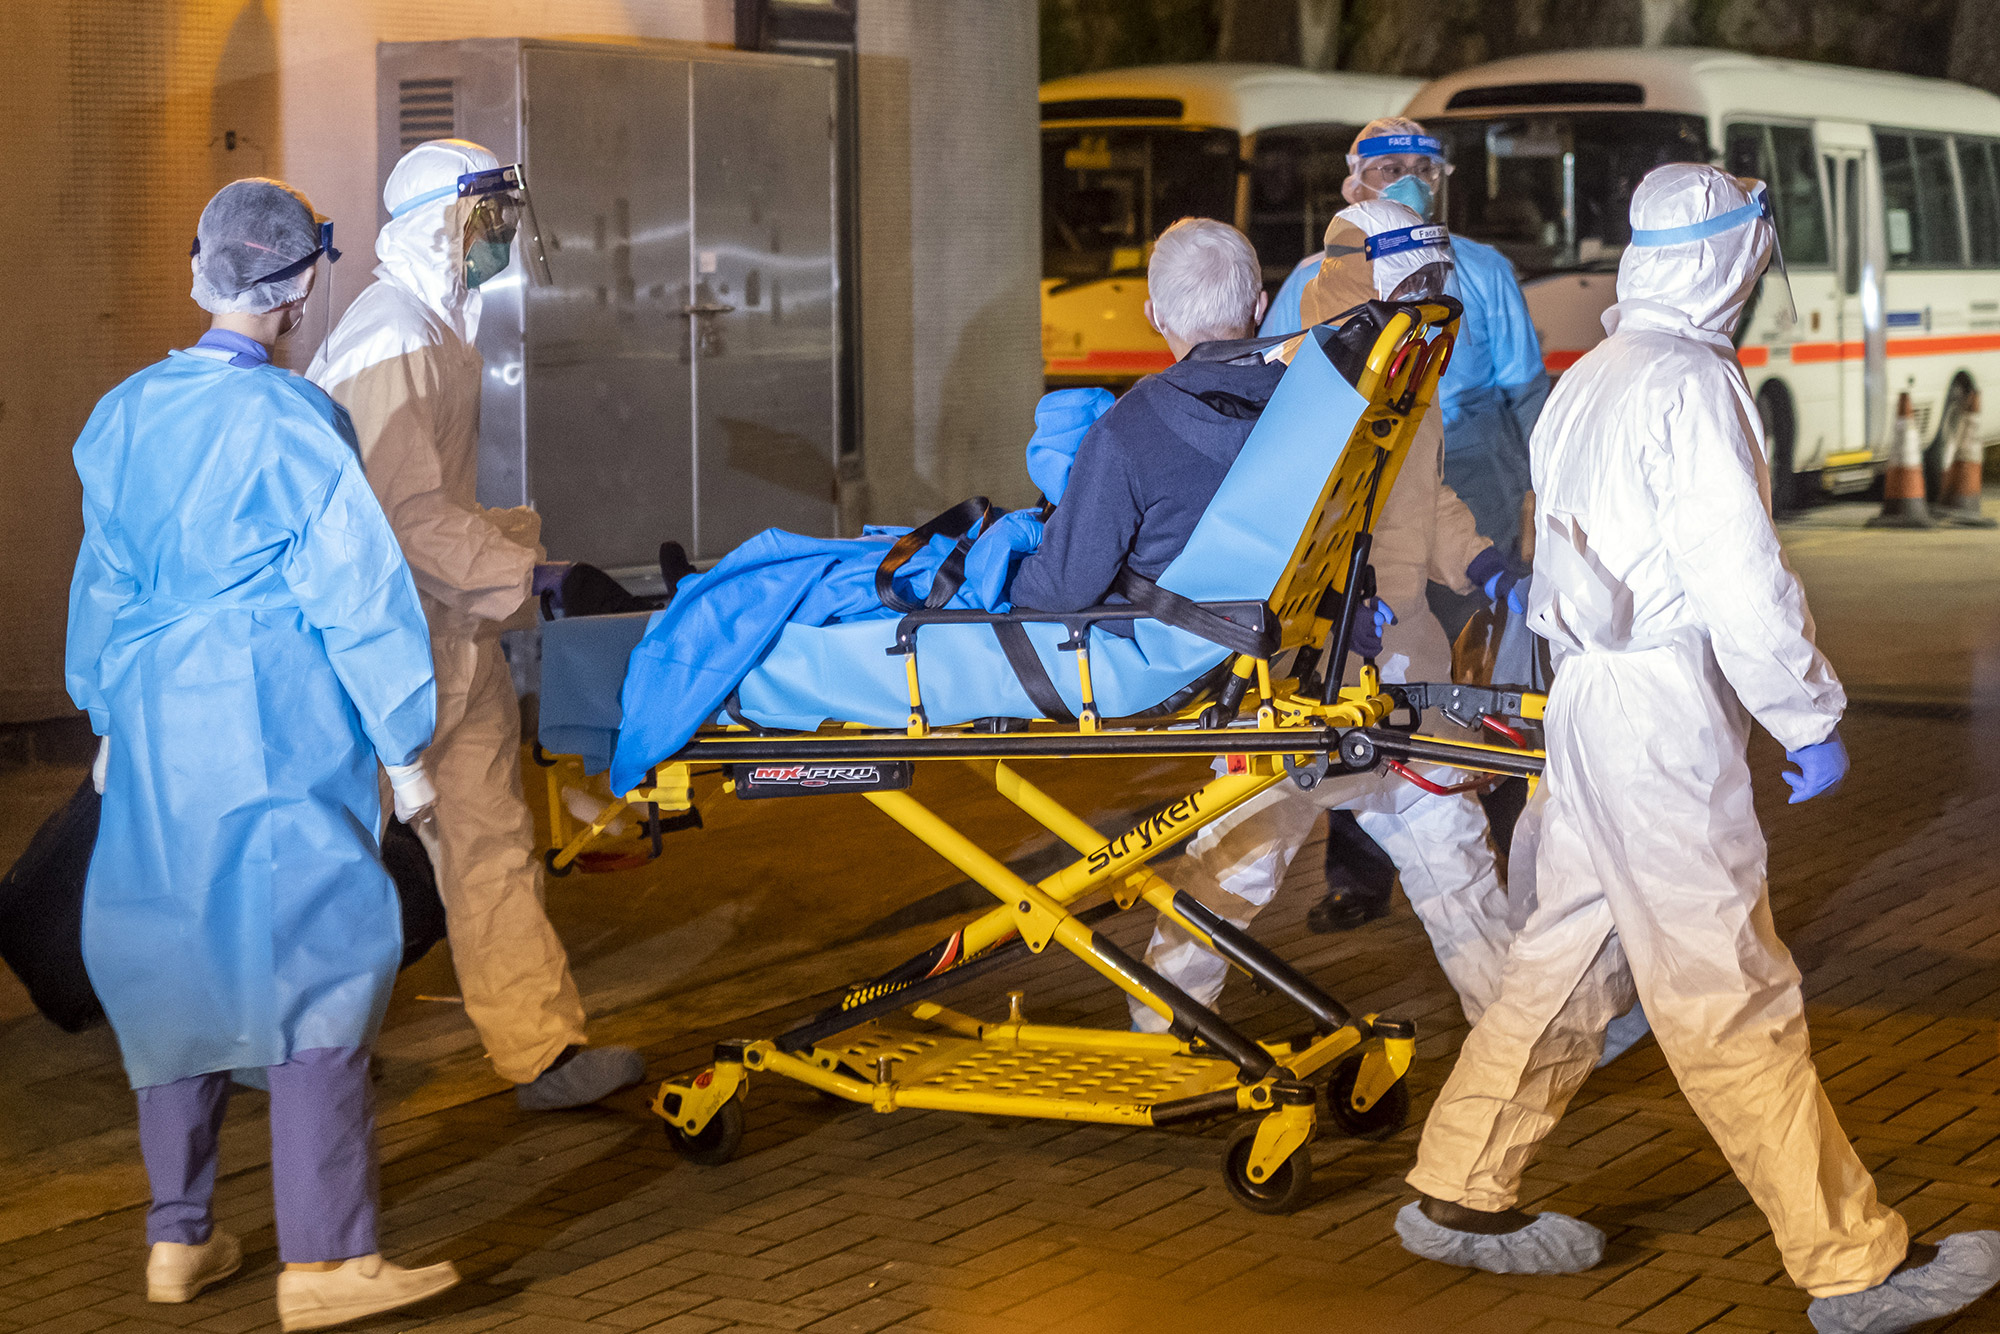 Medical workers&nbsp;transport a patient believed to have&nbsp;coronavirus&nbsp;in Hong Kong, China.&nbsp;